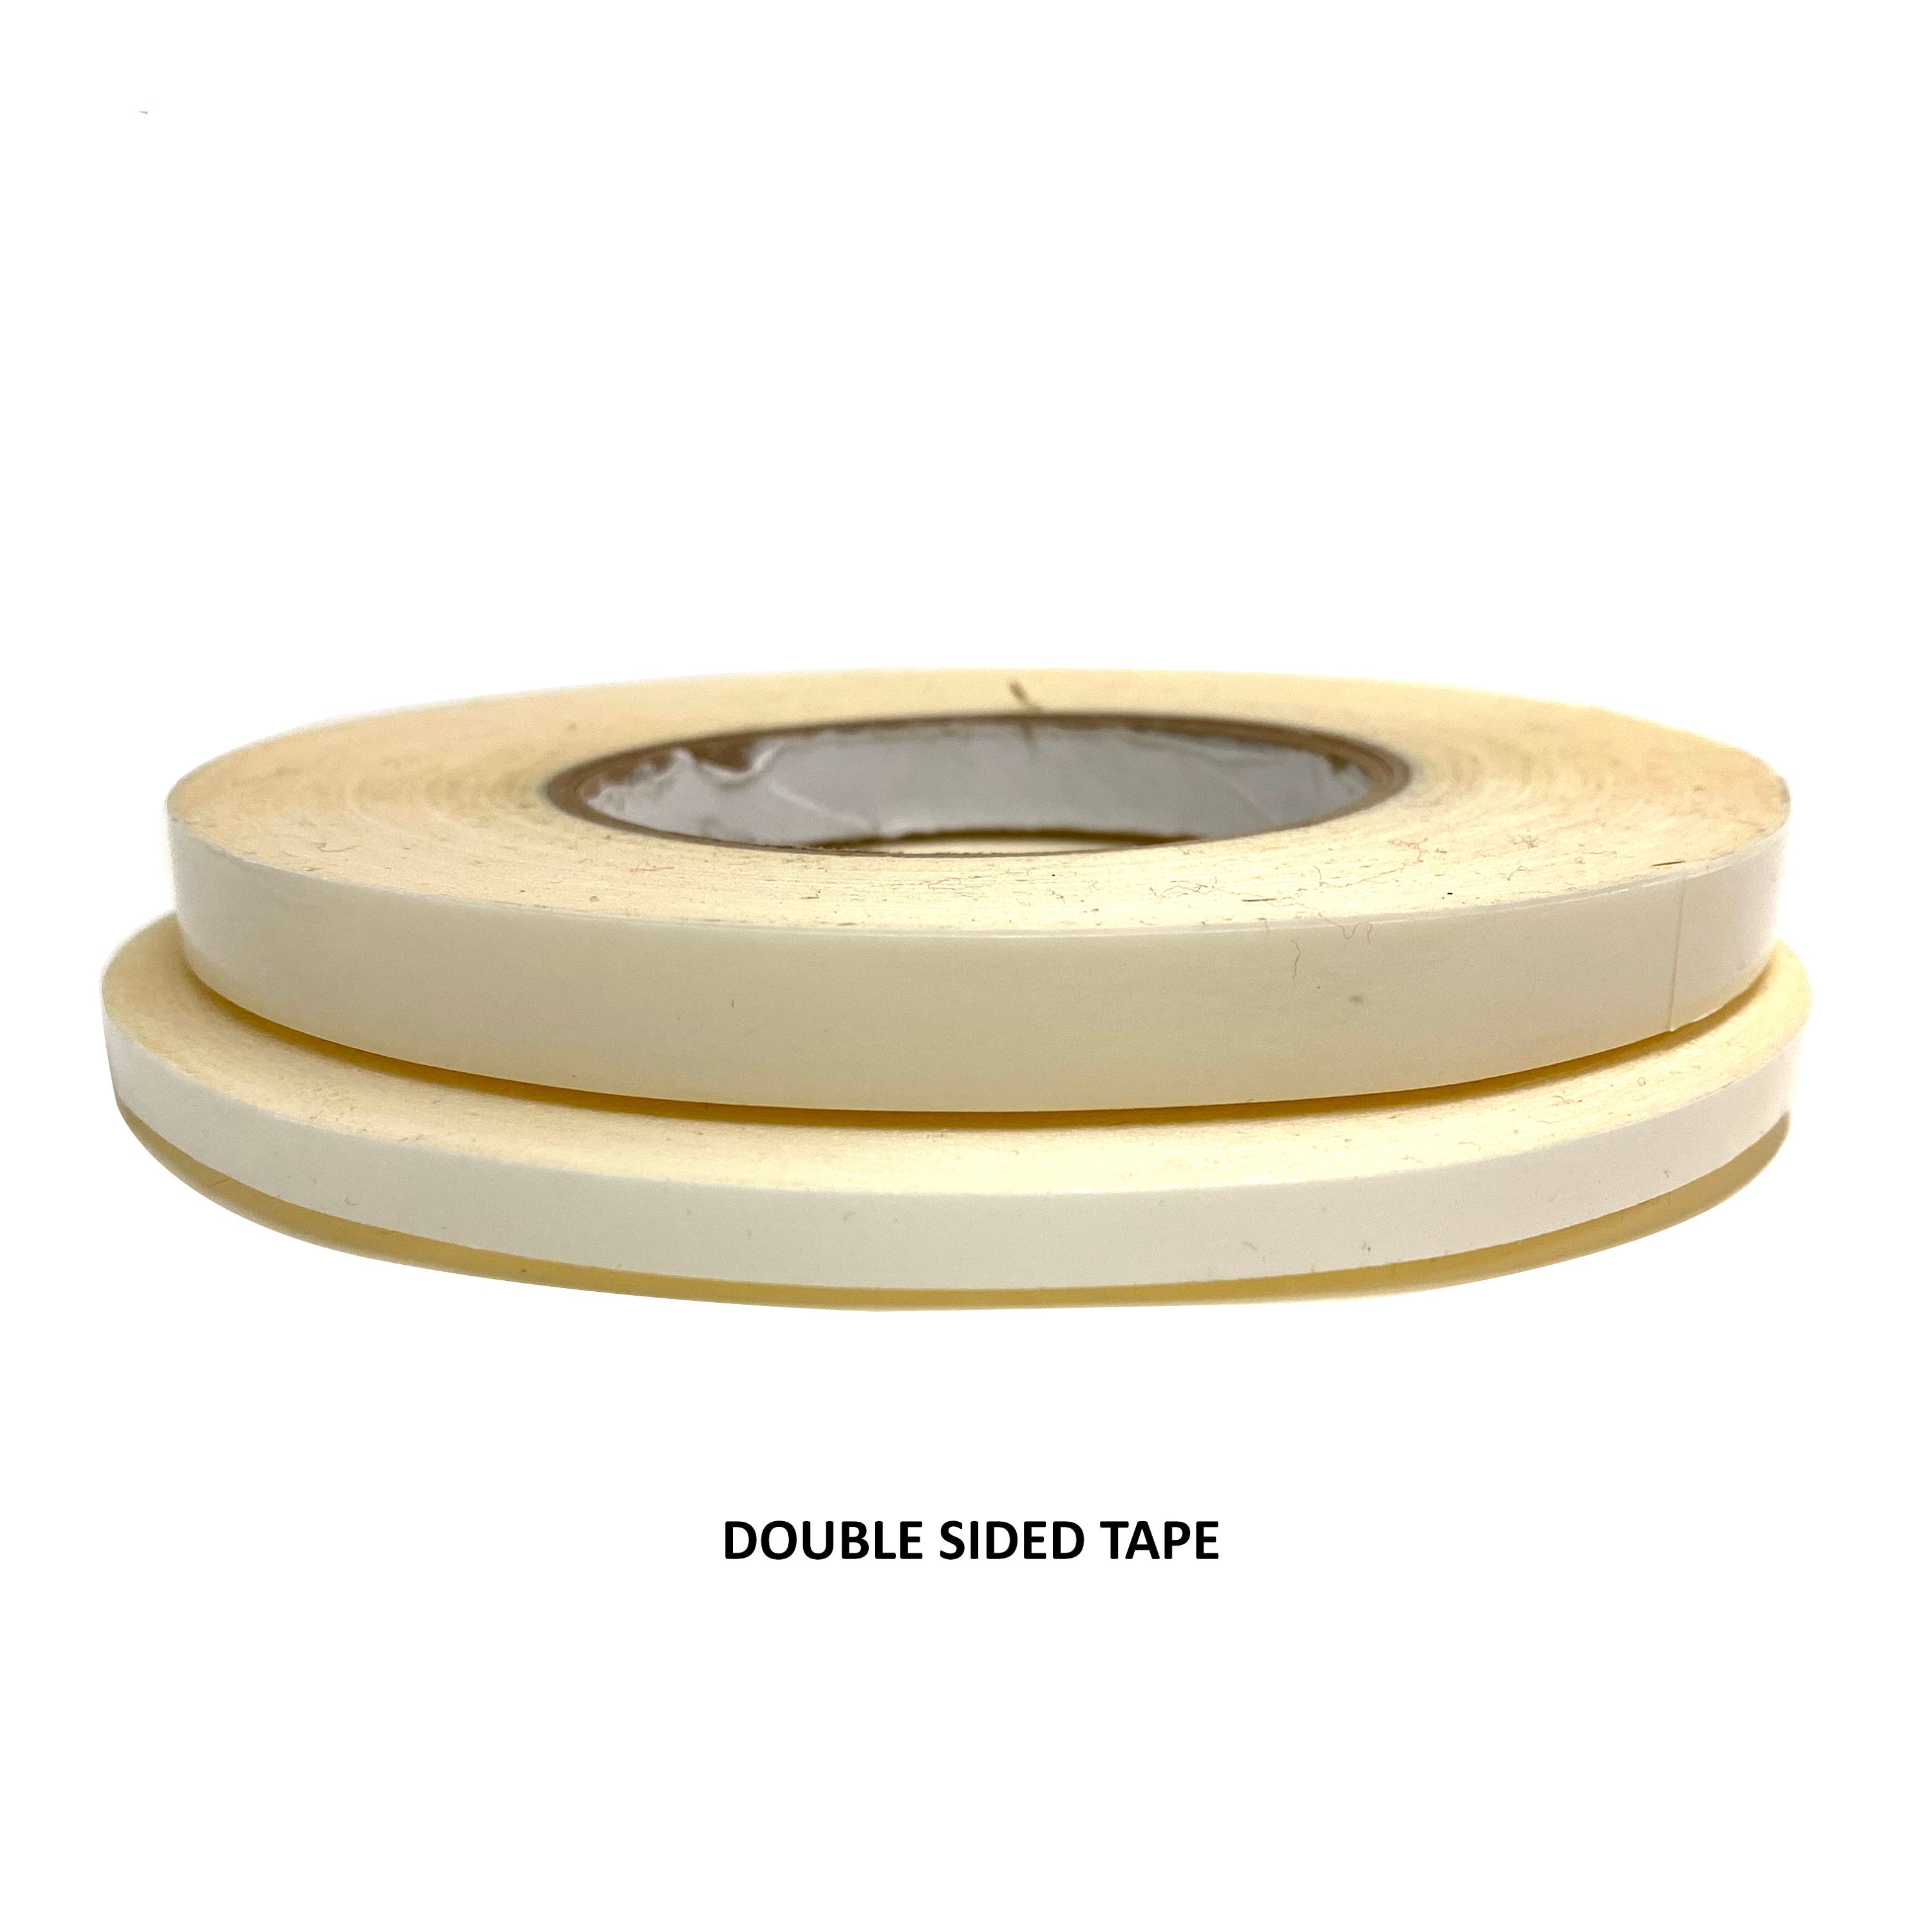 Leather Tape, Basting Tape, Double Sided Tape, Tape, Double Coated Tape, Fabric  Tape 1/8, 3/16, 1/4, 1/2, 3/4 